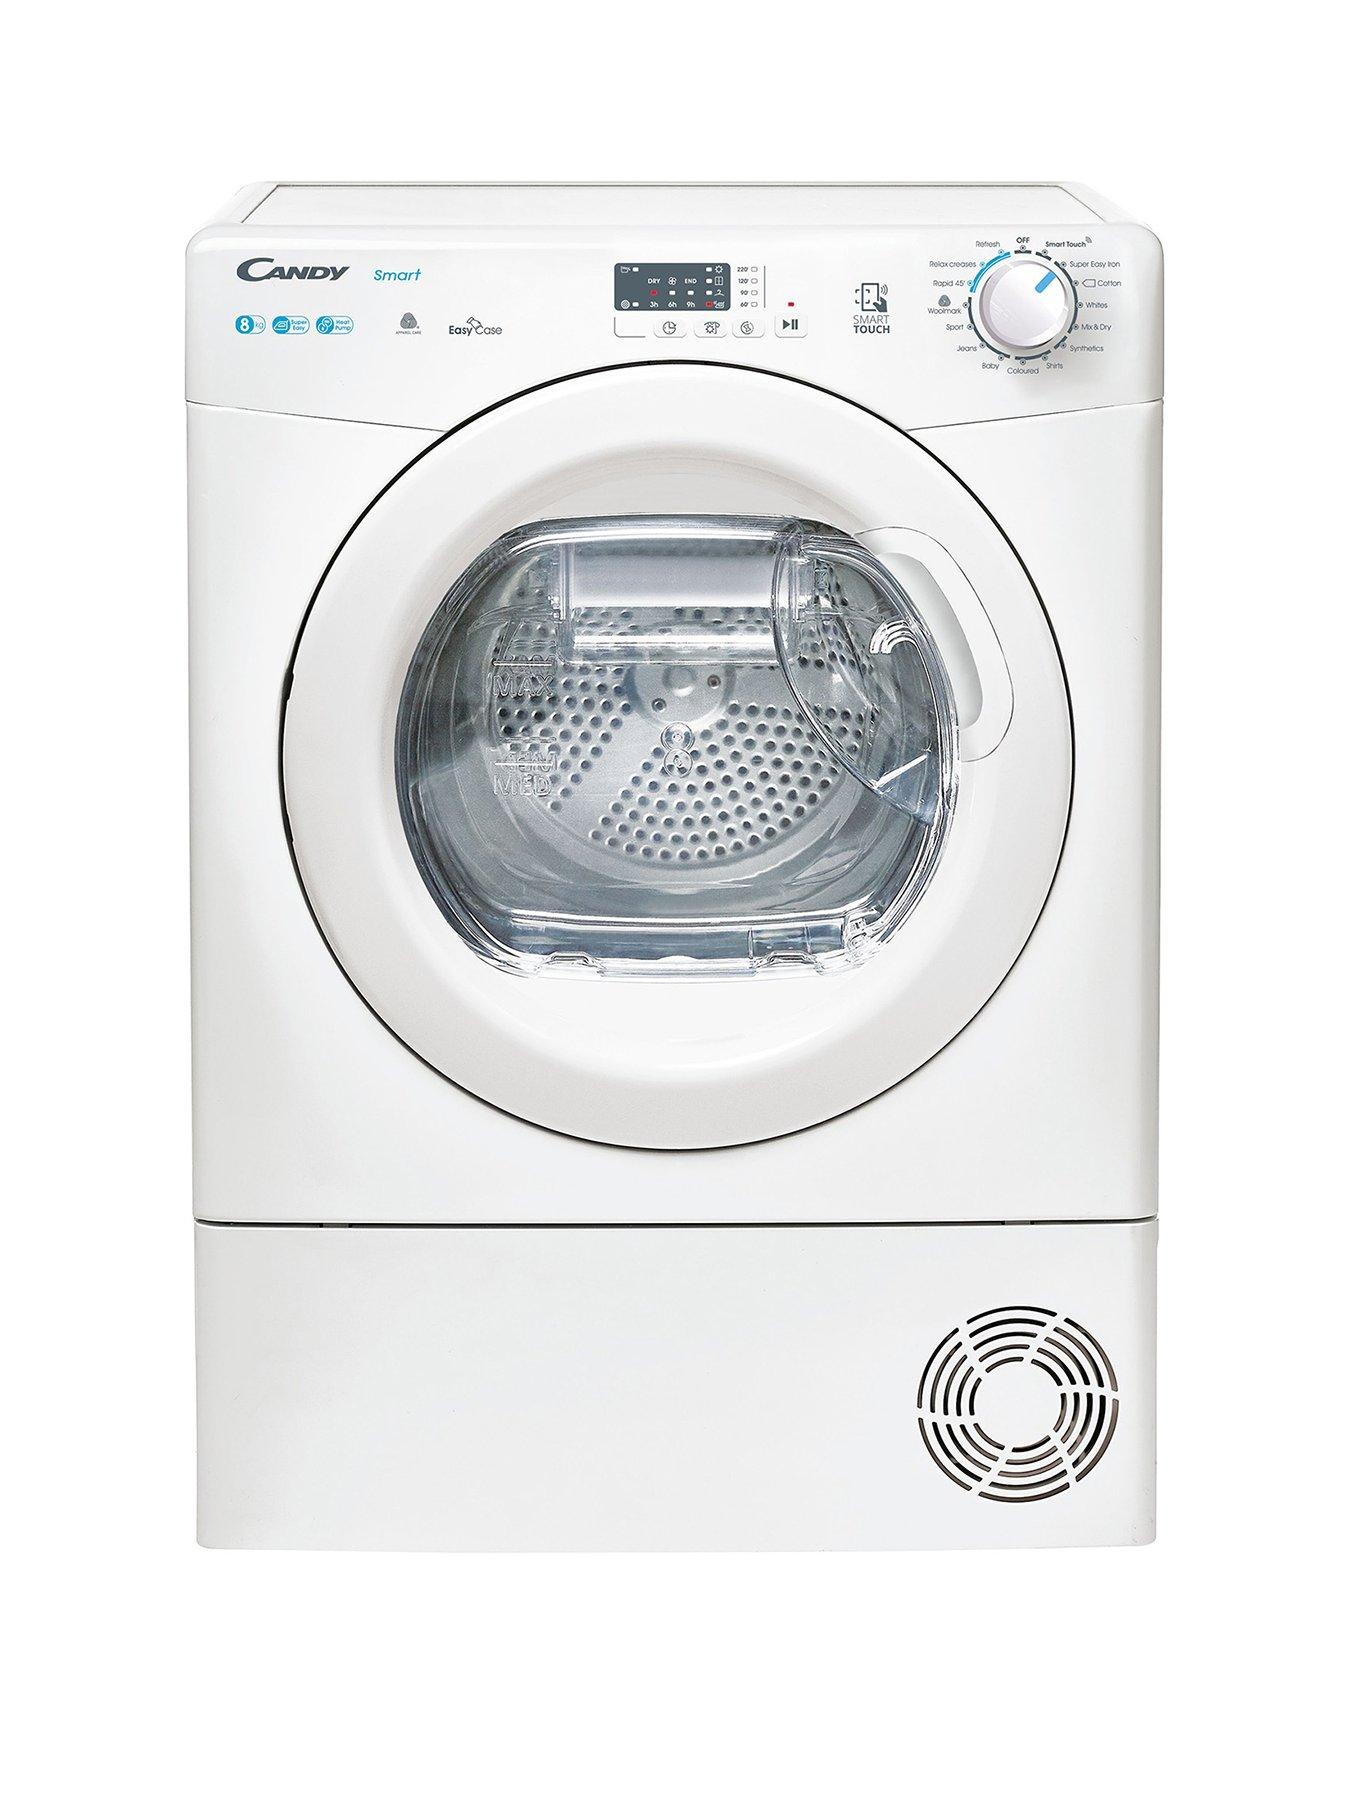 Candy Smart Cseh8A2Le 8Kg Heat Pump Tumble Dryer, A++ Rated - White